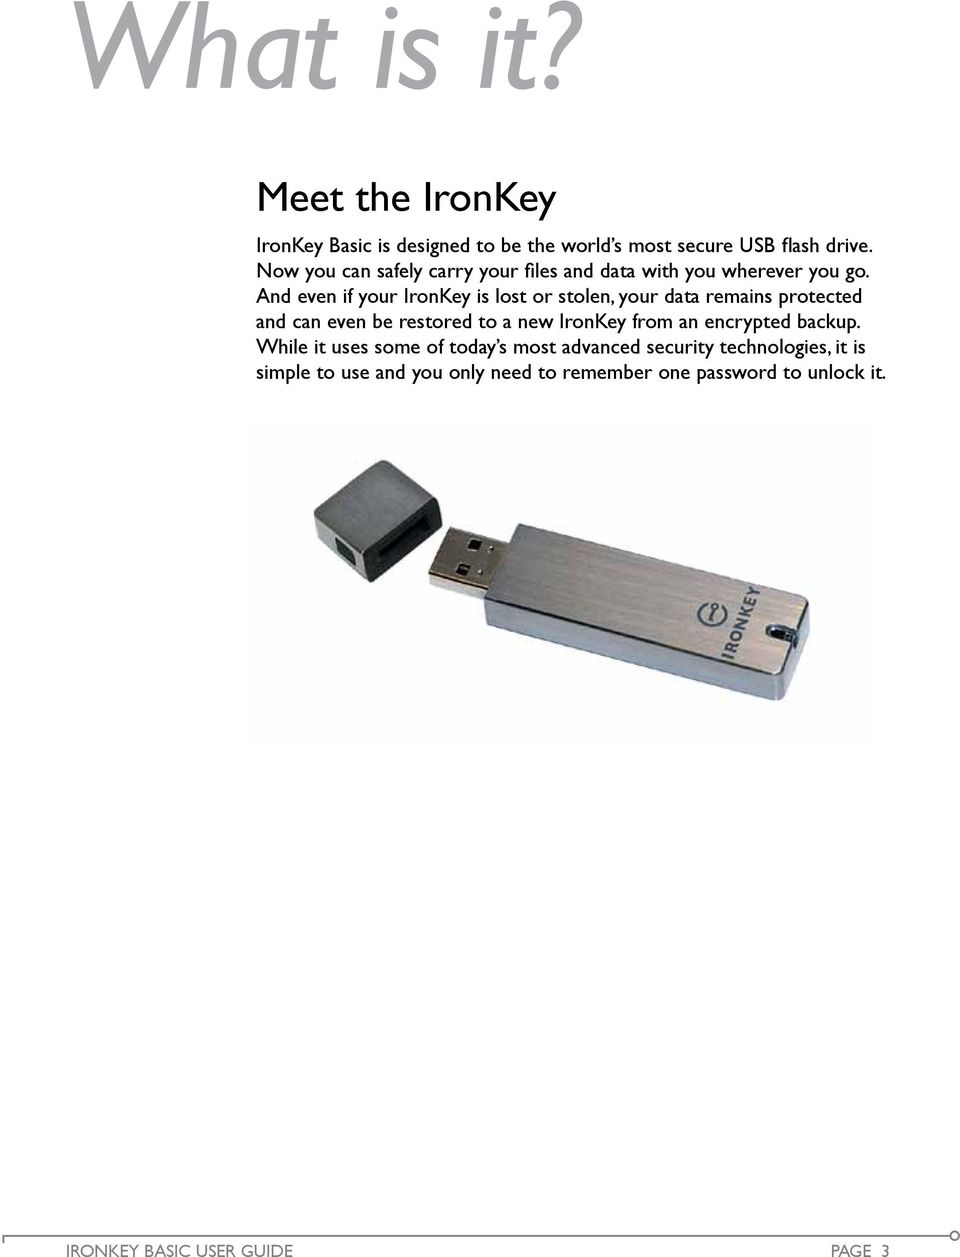 And even if your IronKey is lost or stolen, your data remains protected and can even be restored to a new IronKey